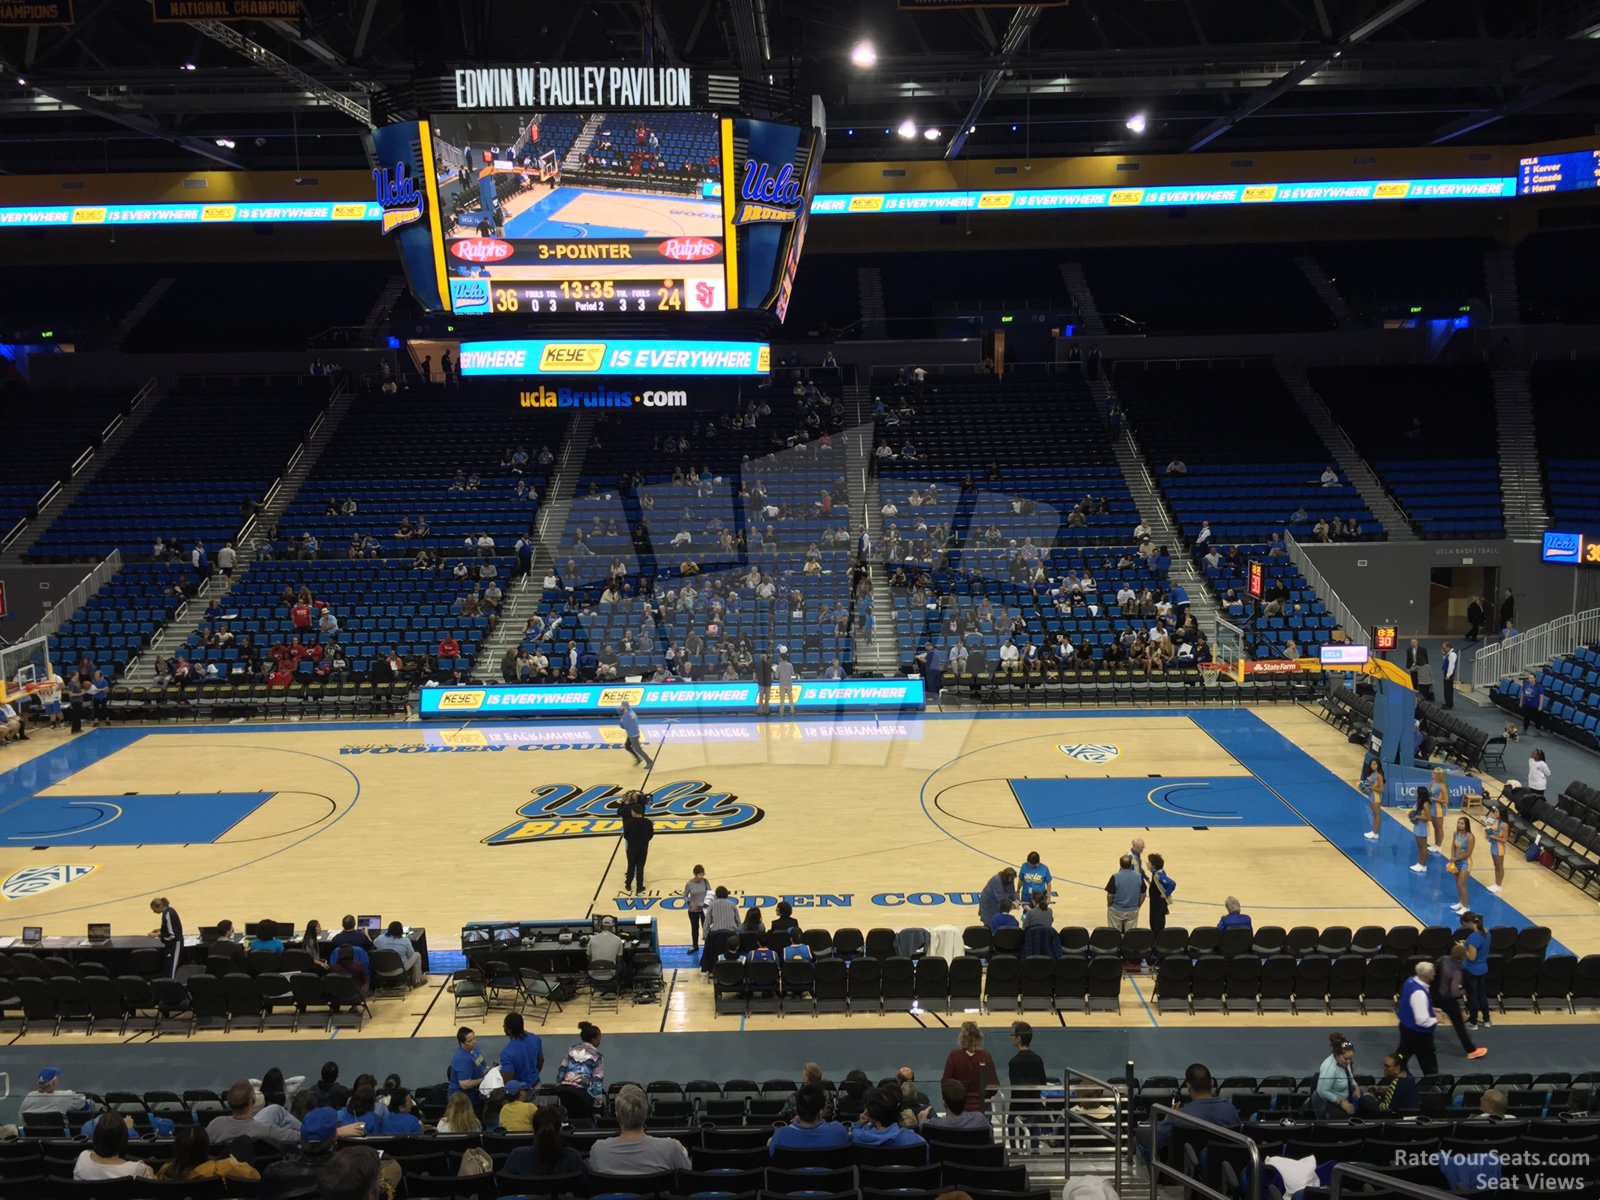 section 115, row 13 seat view  - pauley pavilion